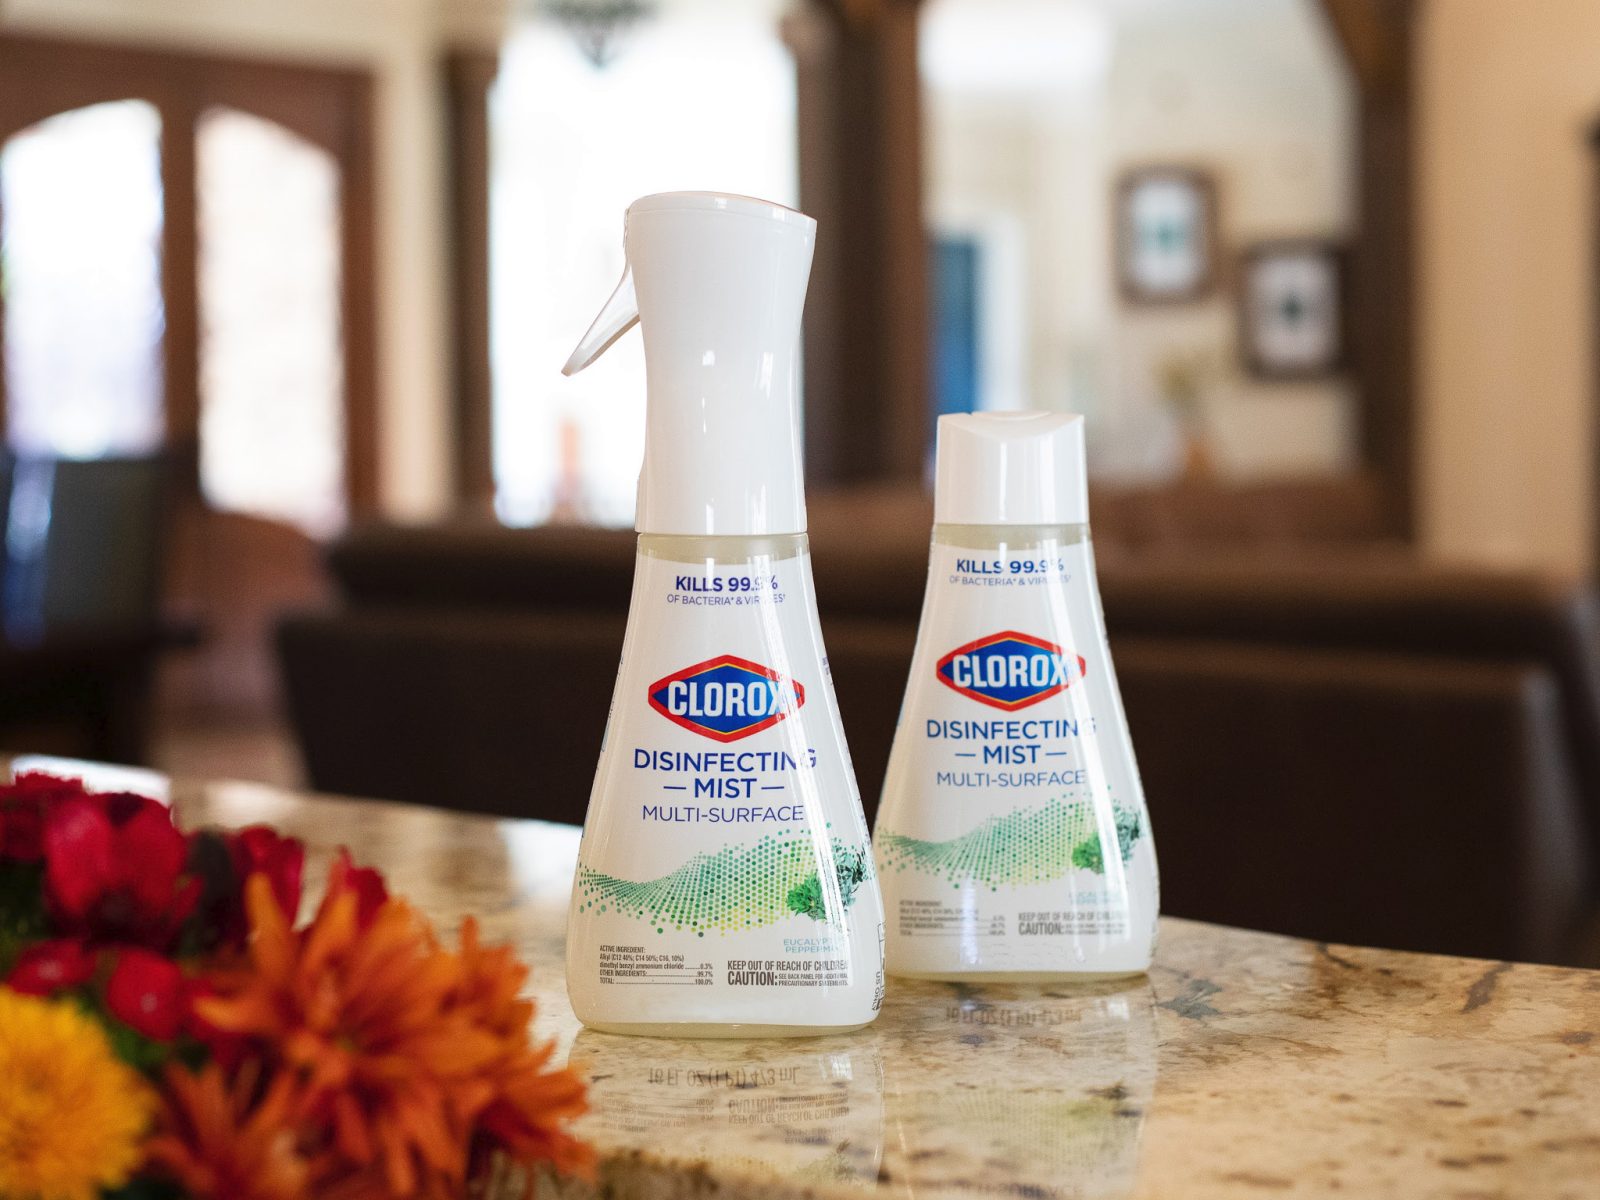 Clorox Disinfecting Mist Refills As Low As $2.29 At Kroger